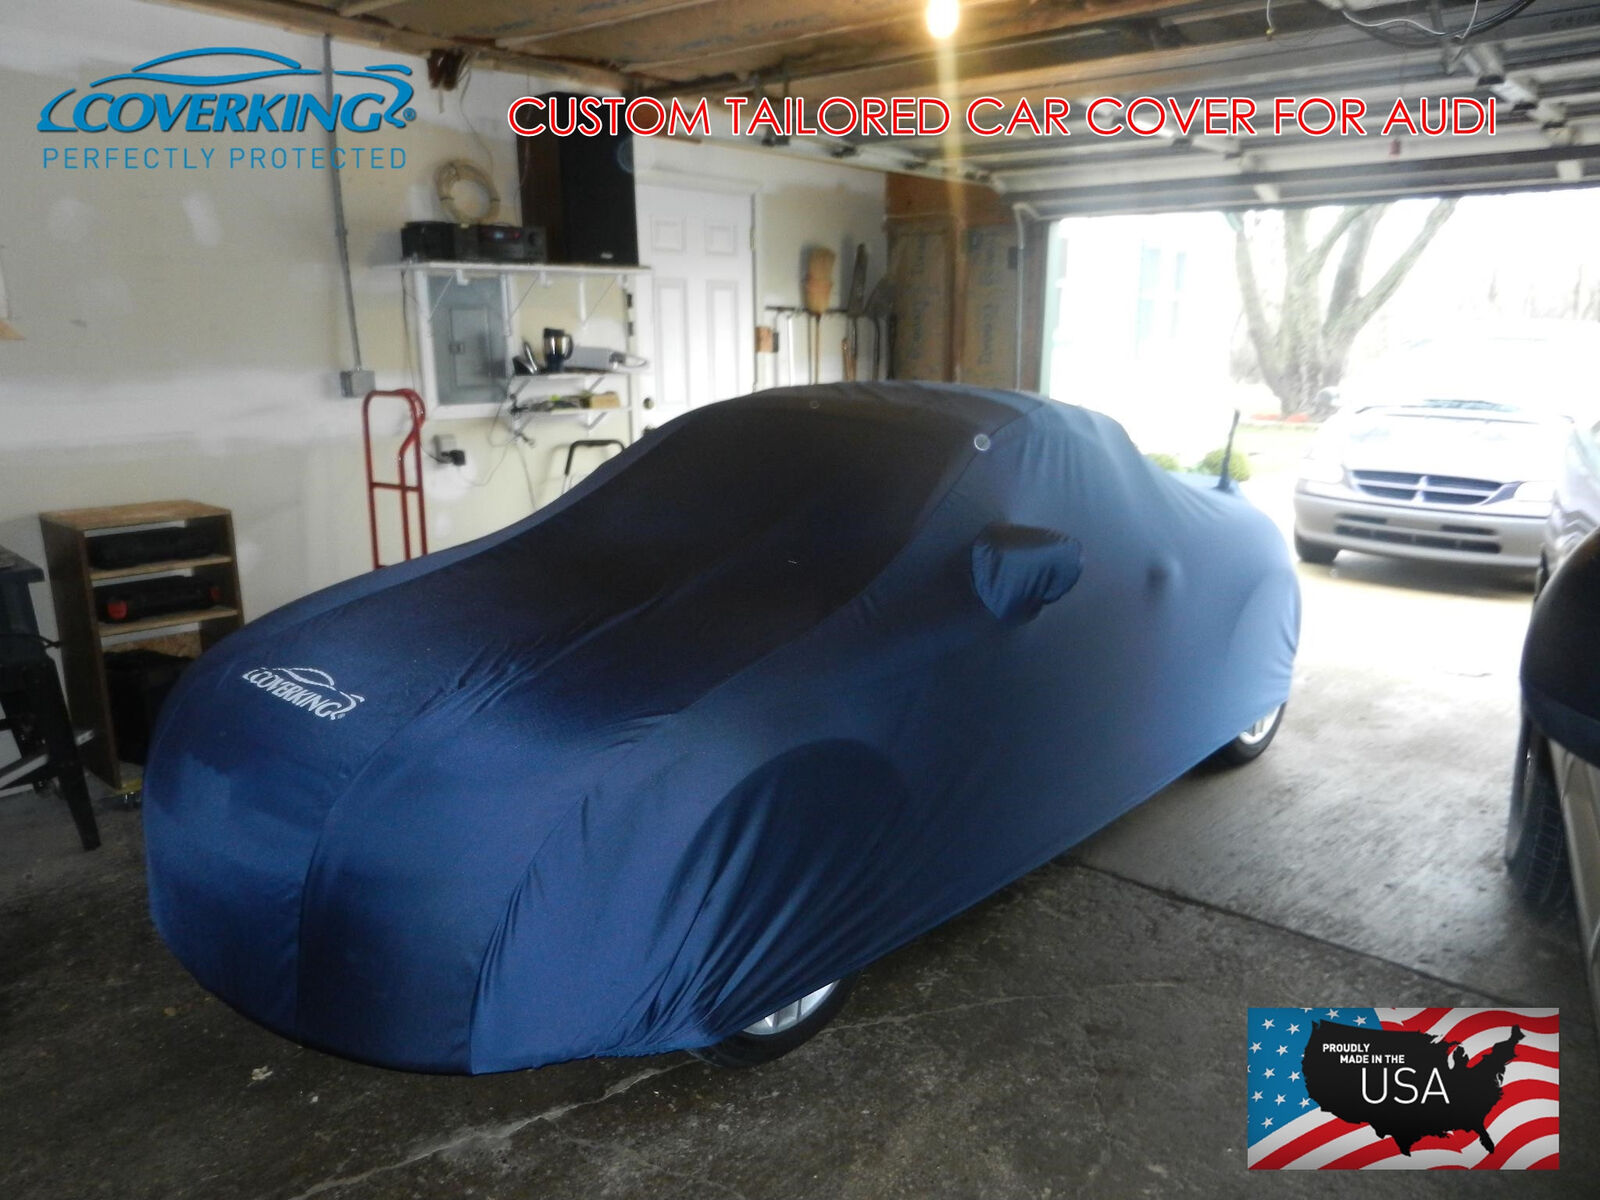 Premium Satin Stretch Indoor Tailored Car Cover for Audi TT from Coverking